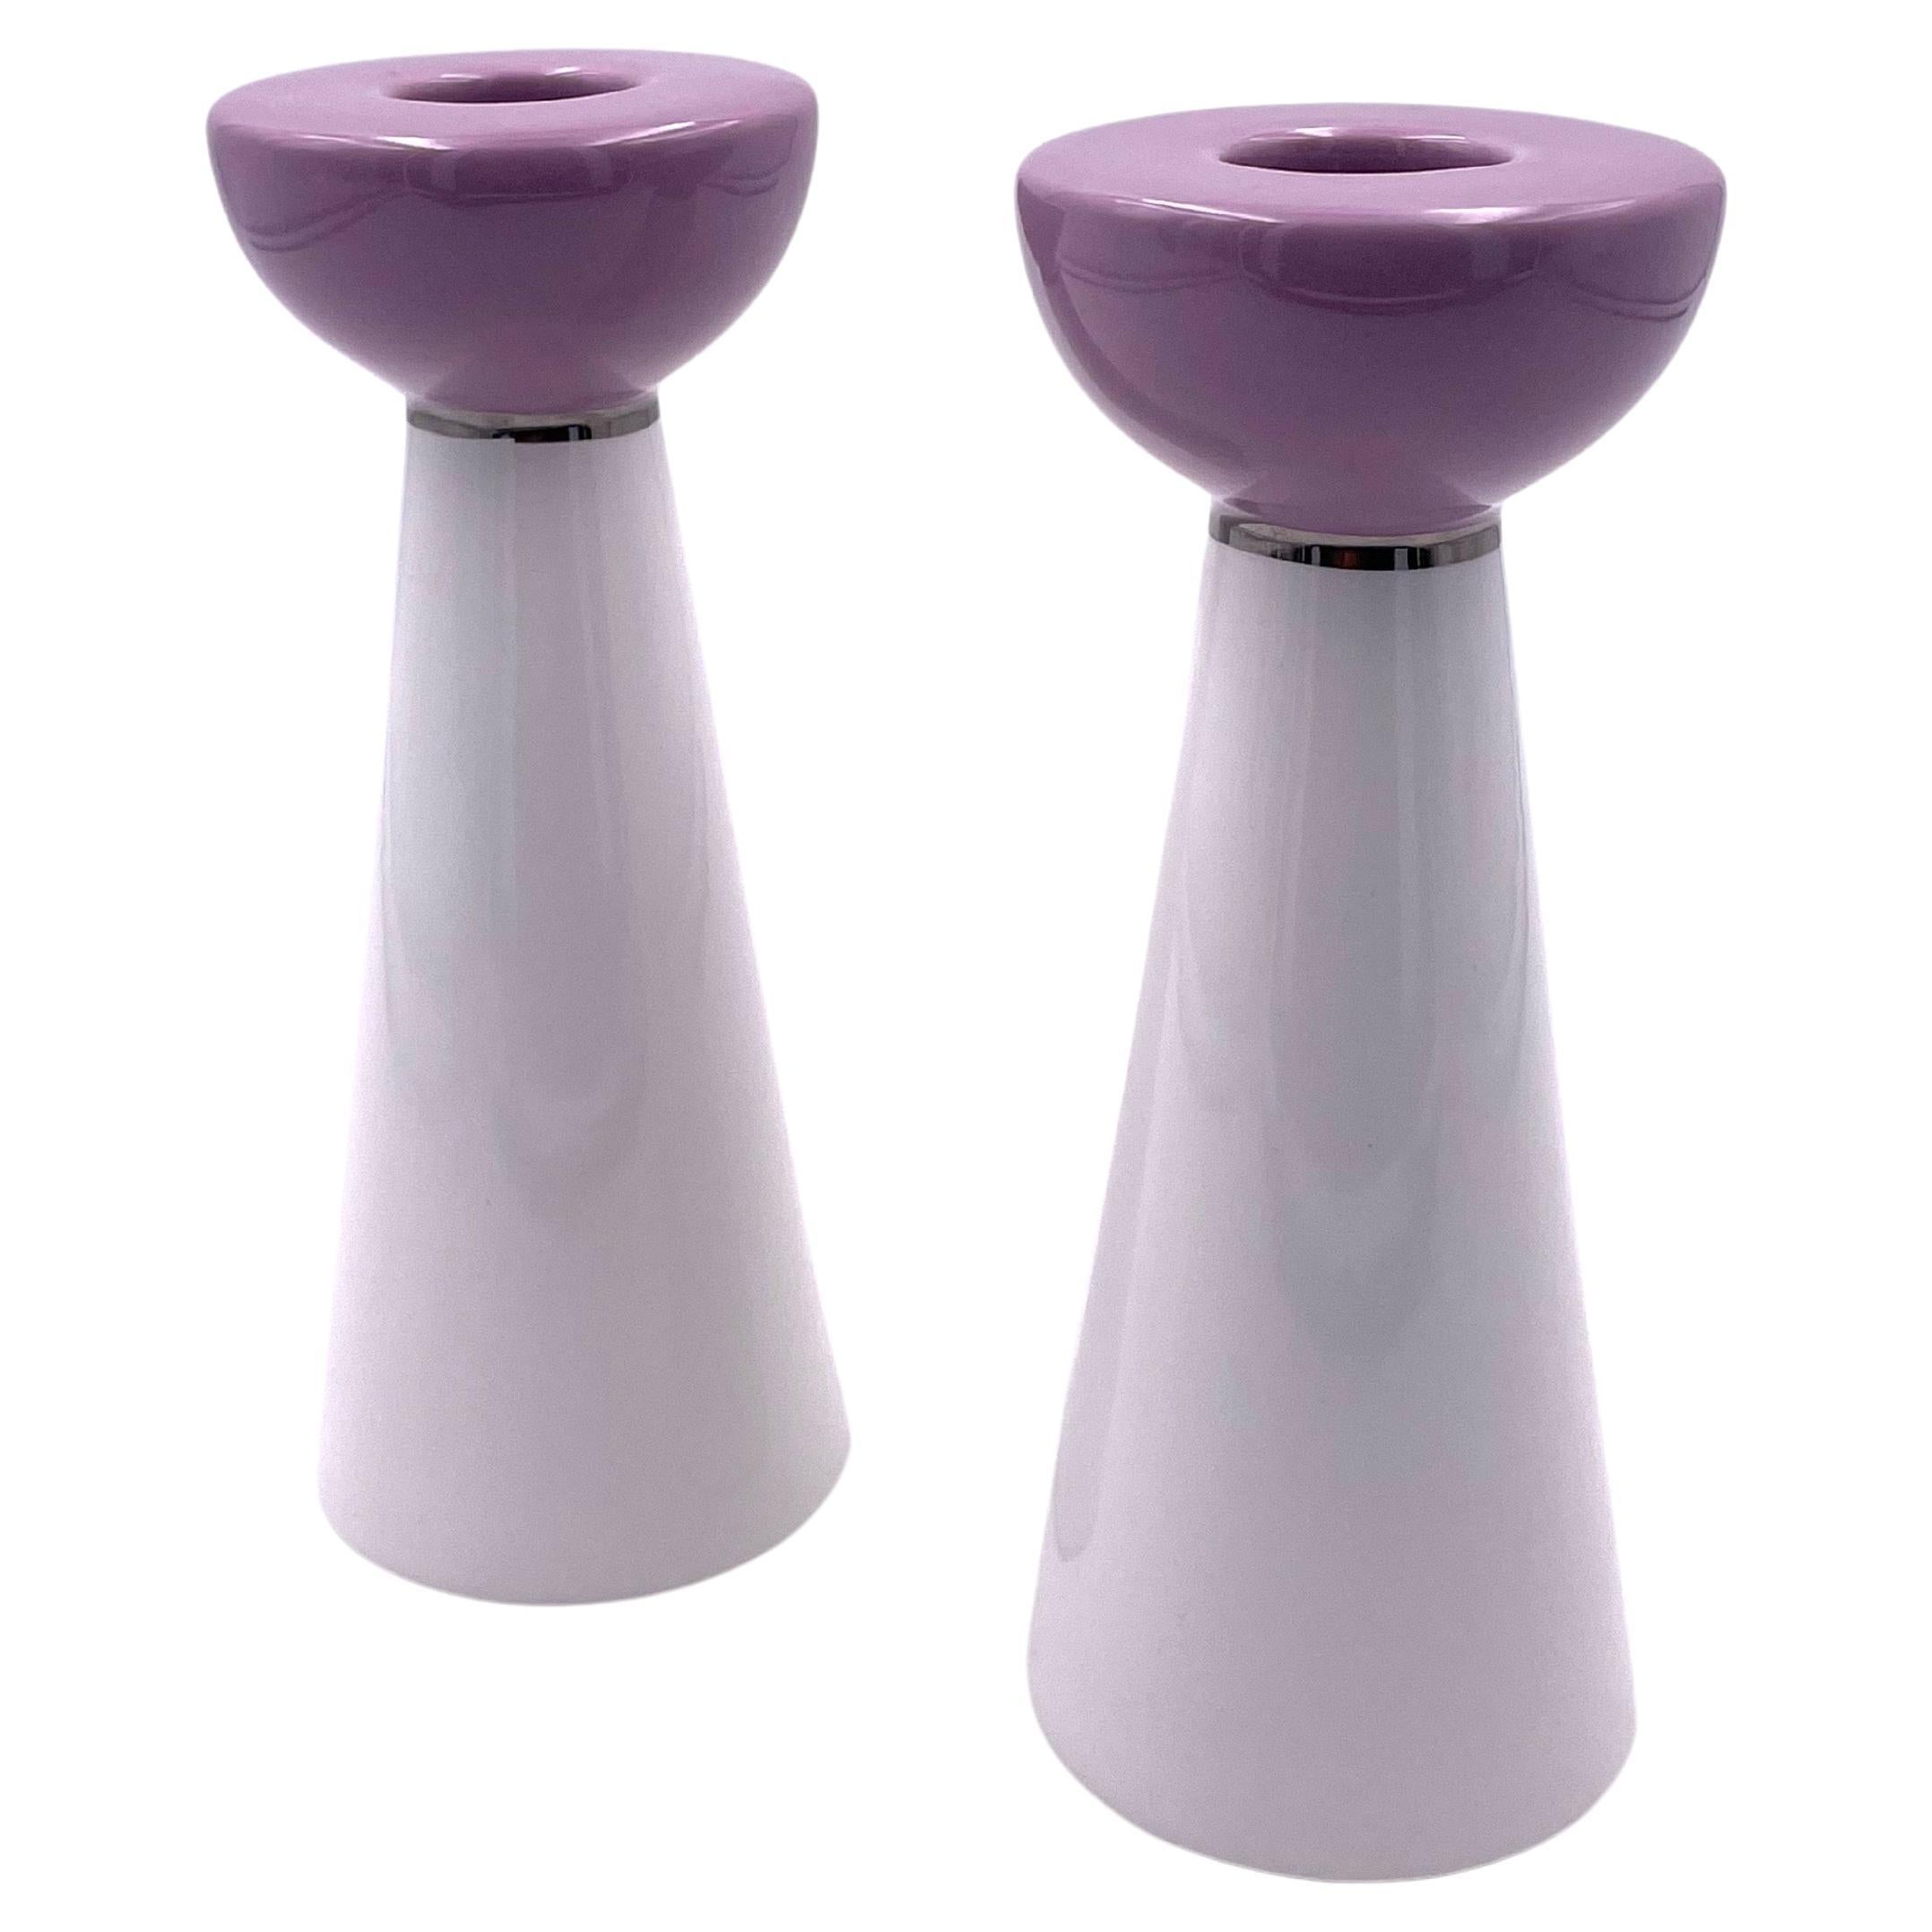 Pair of Postmodern Style Candleholders Designed by Kate Spade for Lenox For Sale